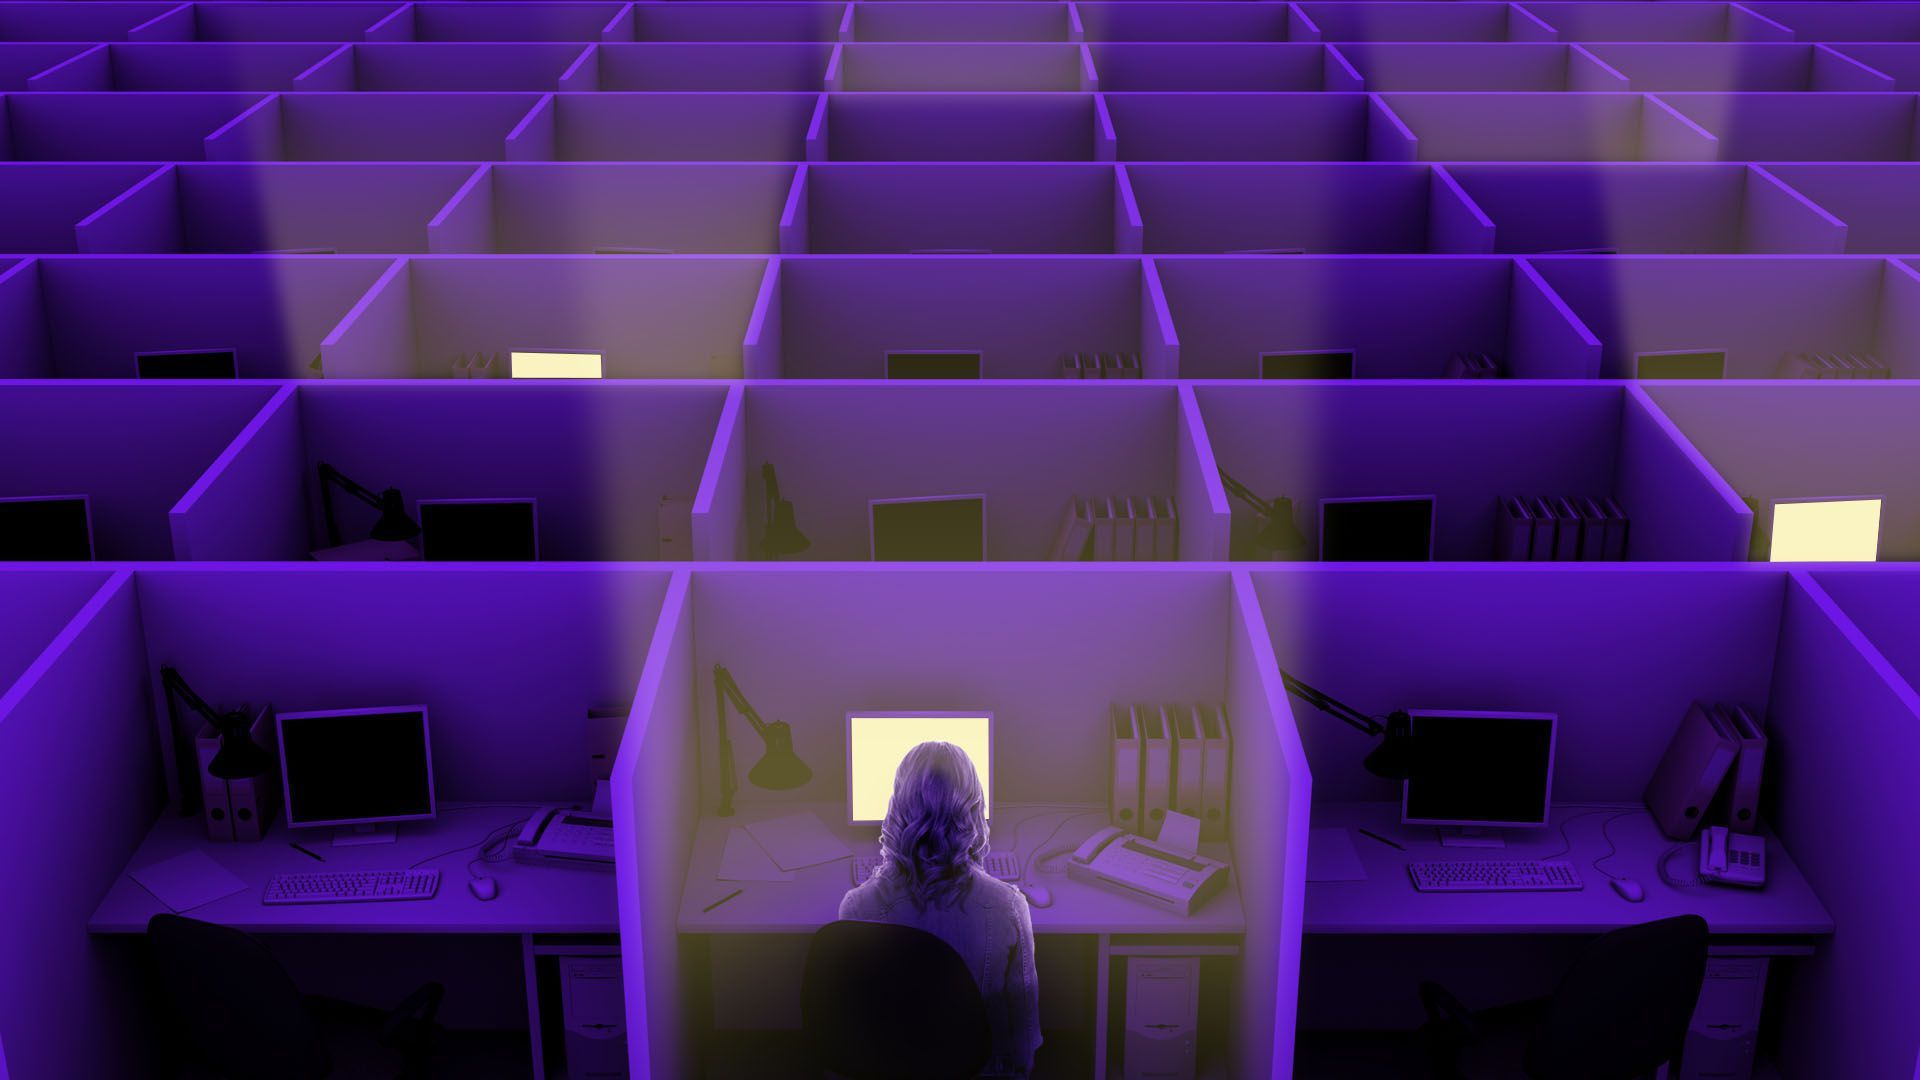 Illustration of one woman in a cubicle surrounded by empty cubicles 